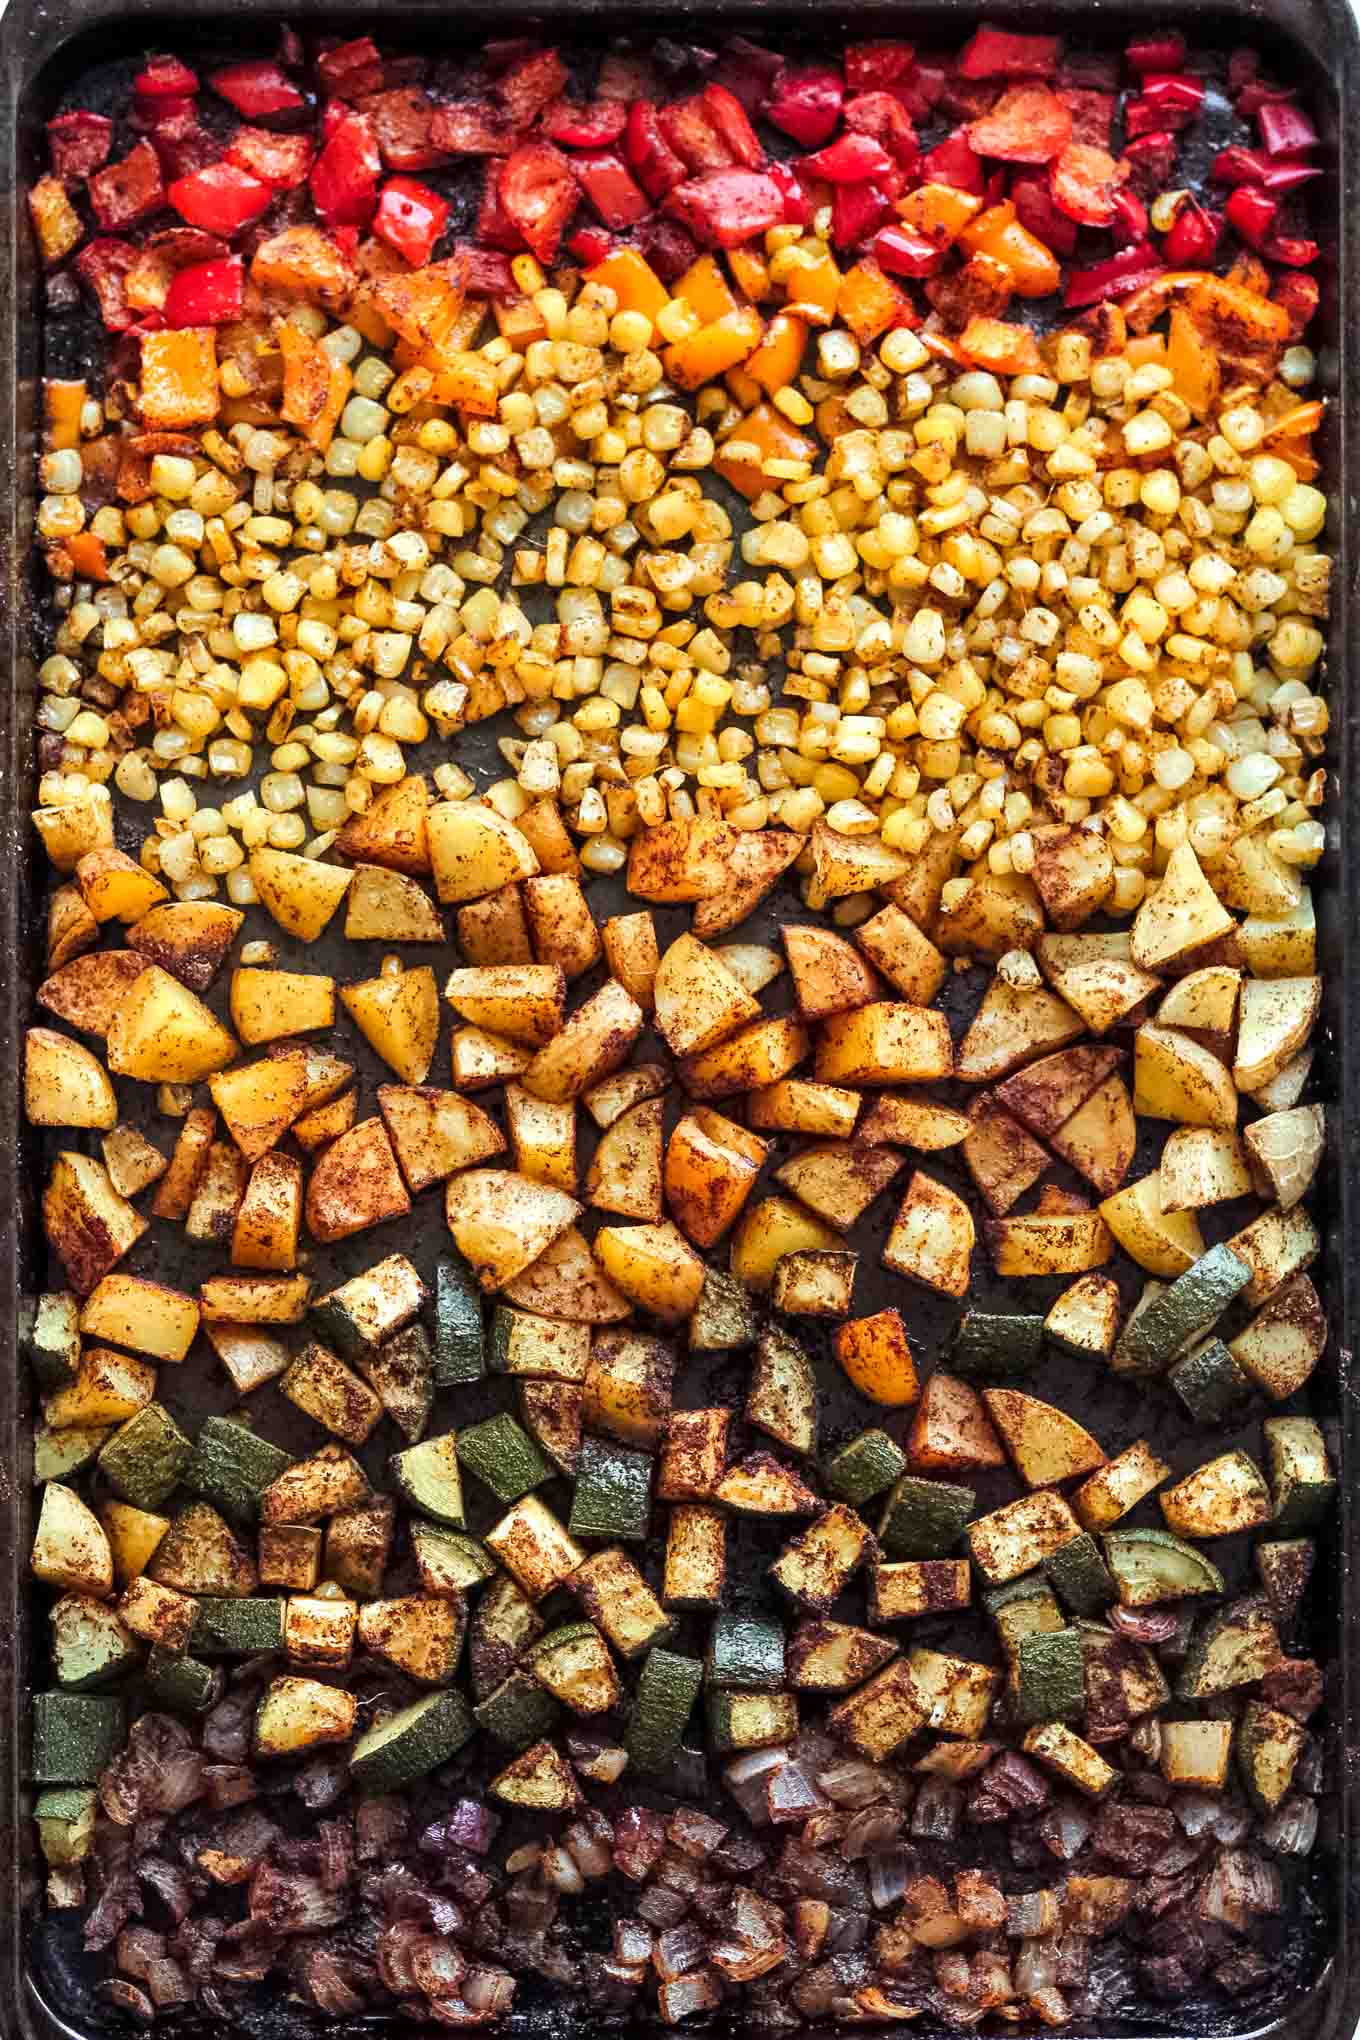 The sheet pan of peppers, zucchini, corn, and potatoes after roasting